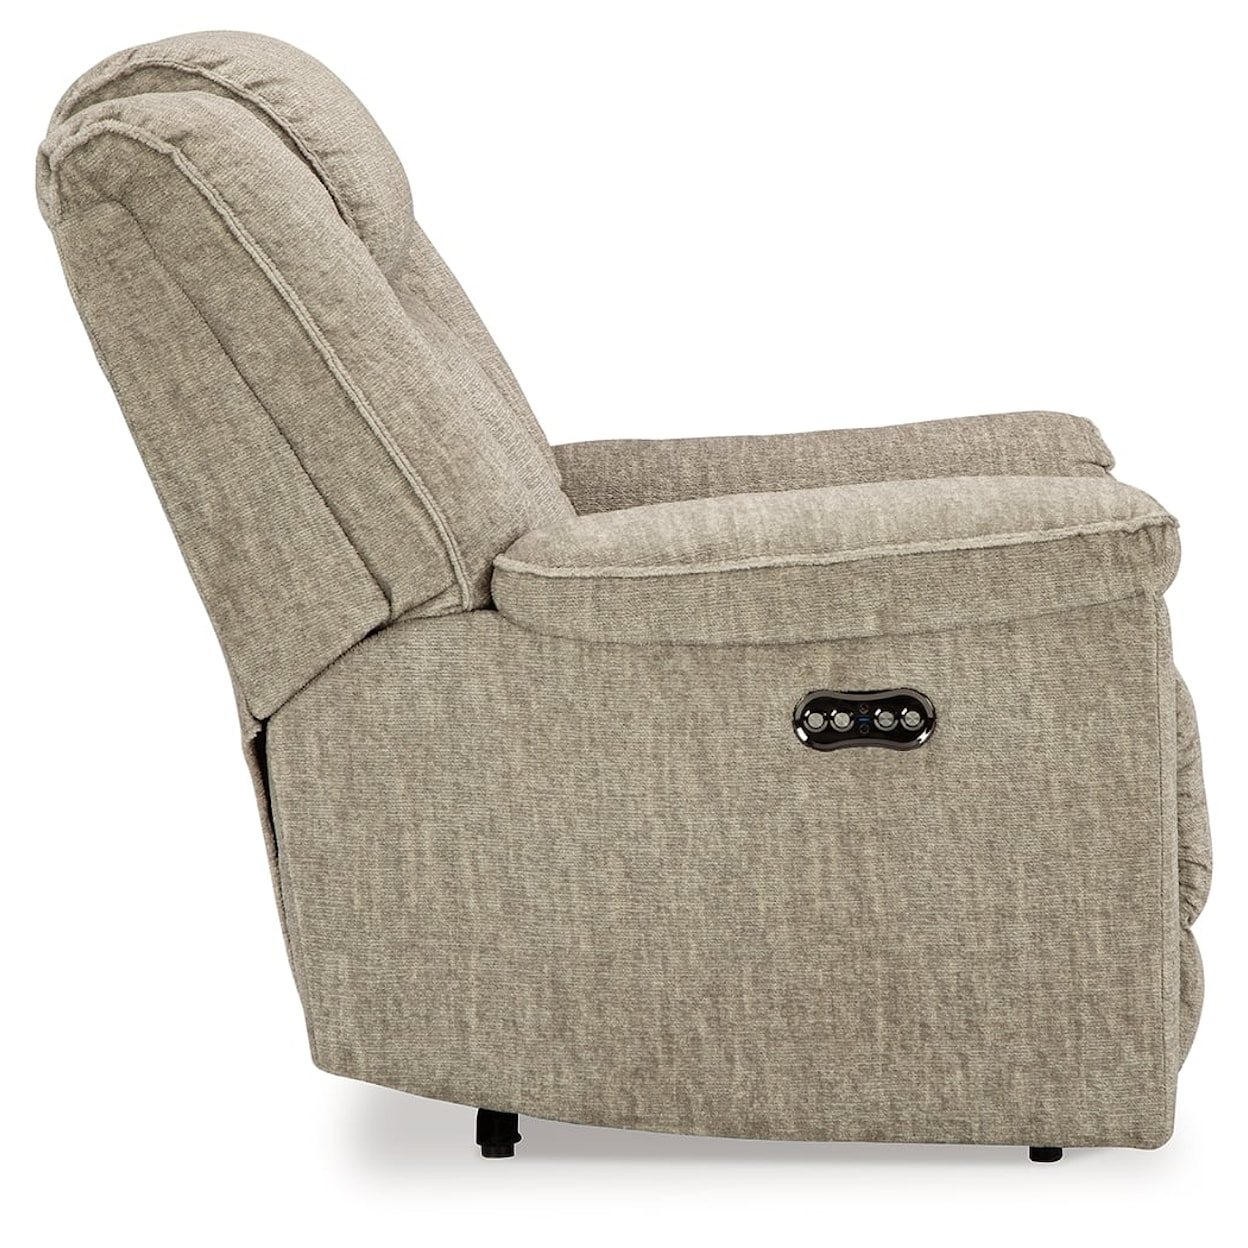 Signature Design by Ashley Hindmarsh Power Recliner with Adjustable Headrest